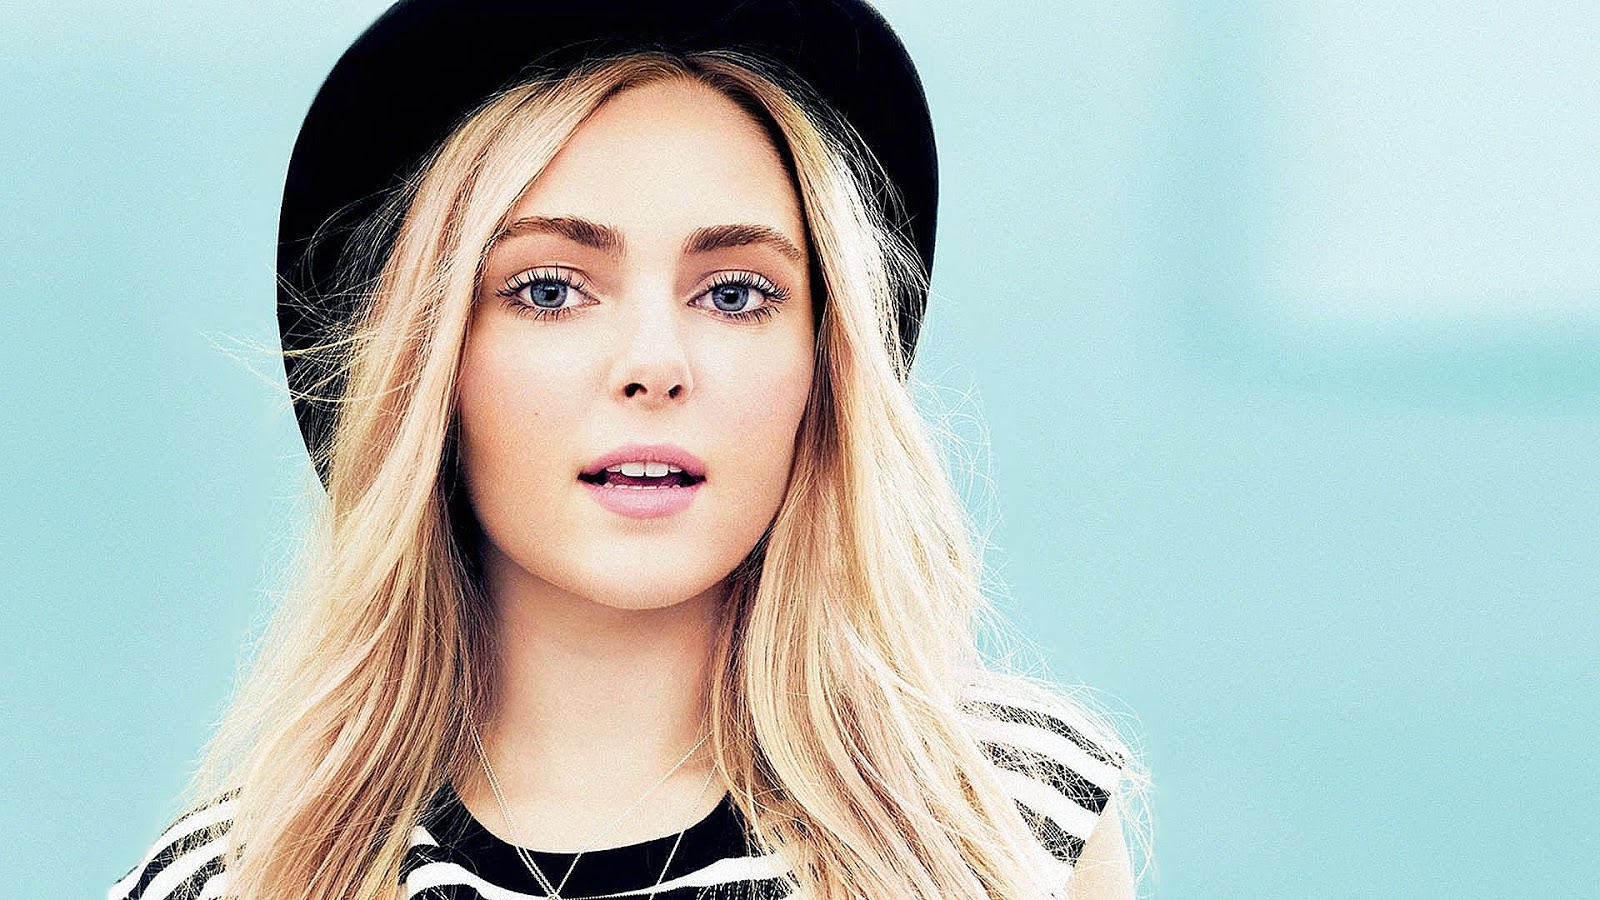 AnnaSophia Robb HD Images and Wallpapers - Hollywood Actress